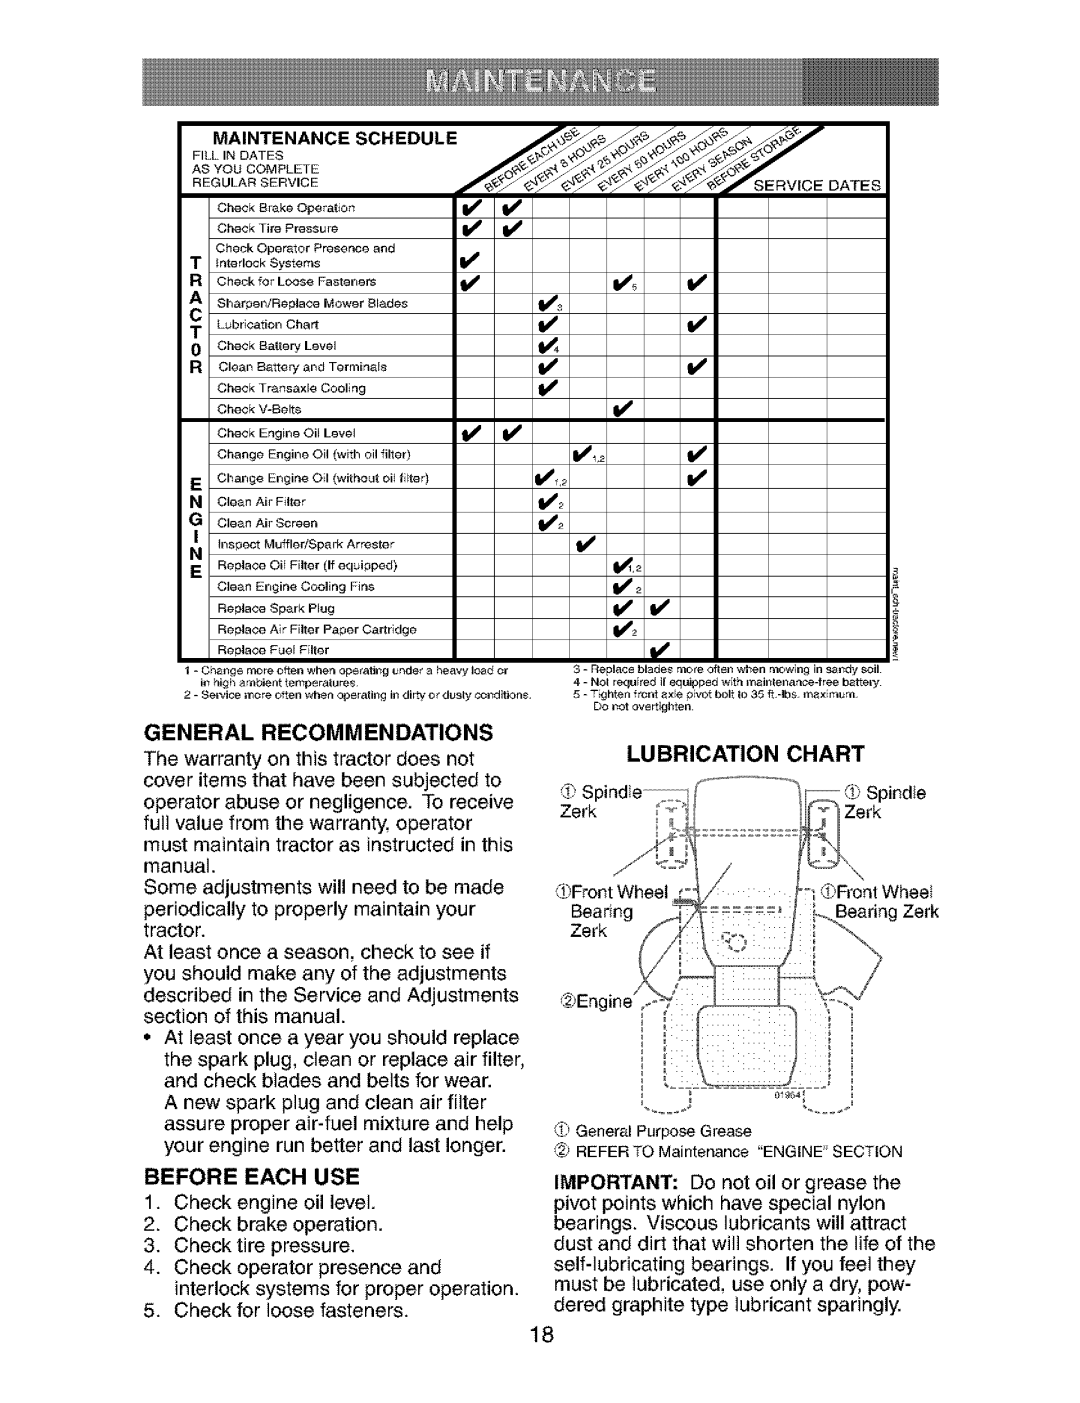 Craftsman 917.273823 owner manual Oates, General Recommendations, Lubrication, Before Each Use 